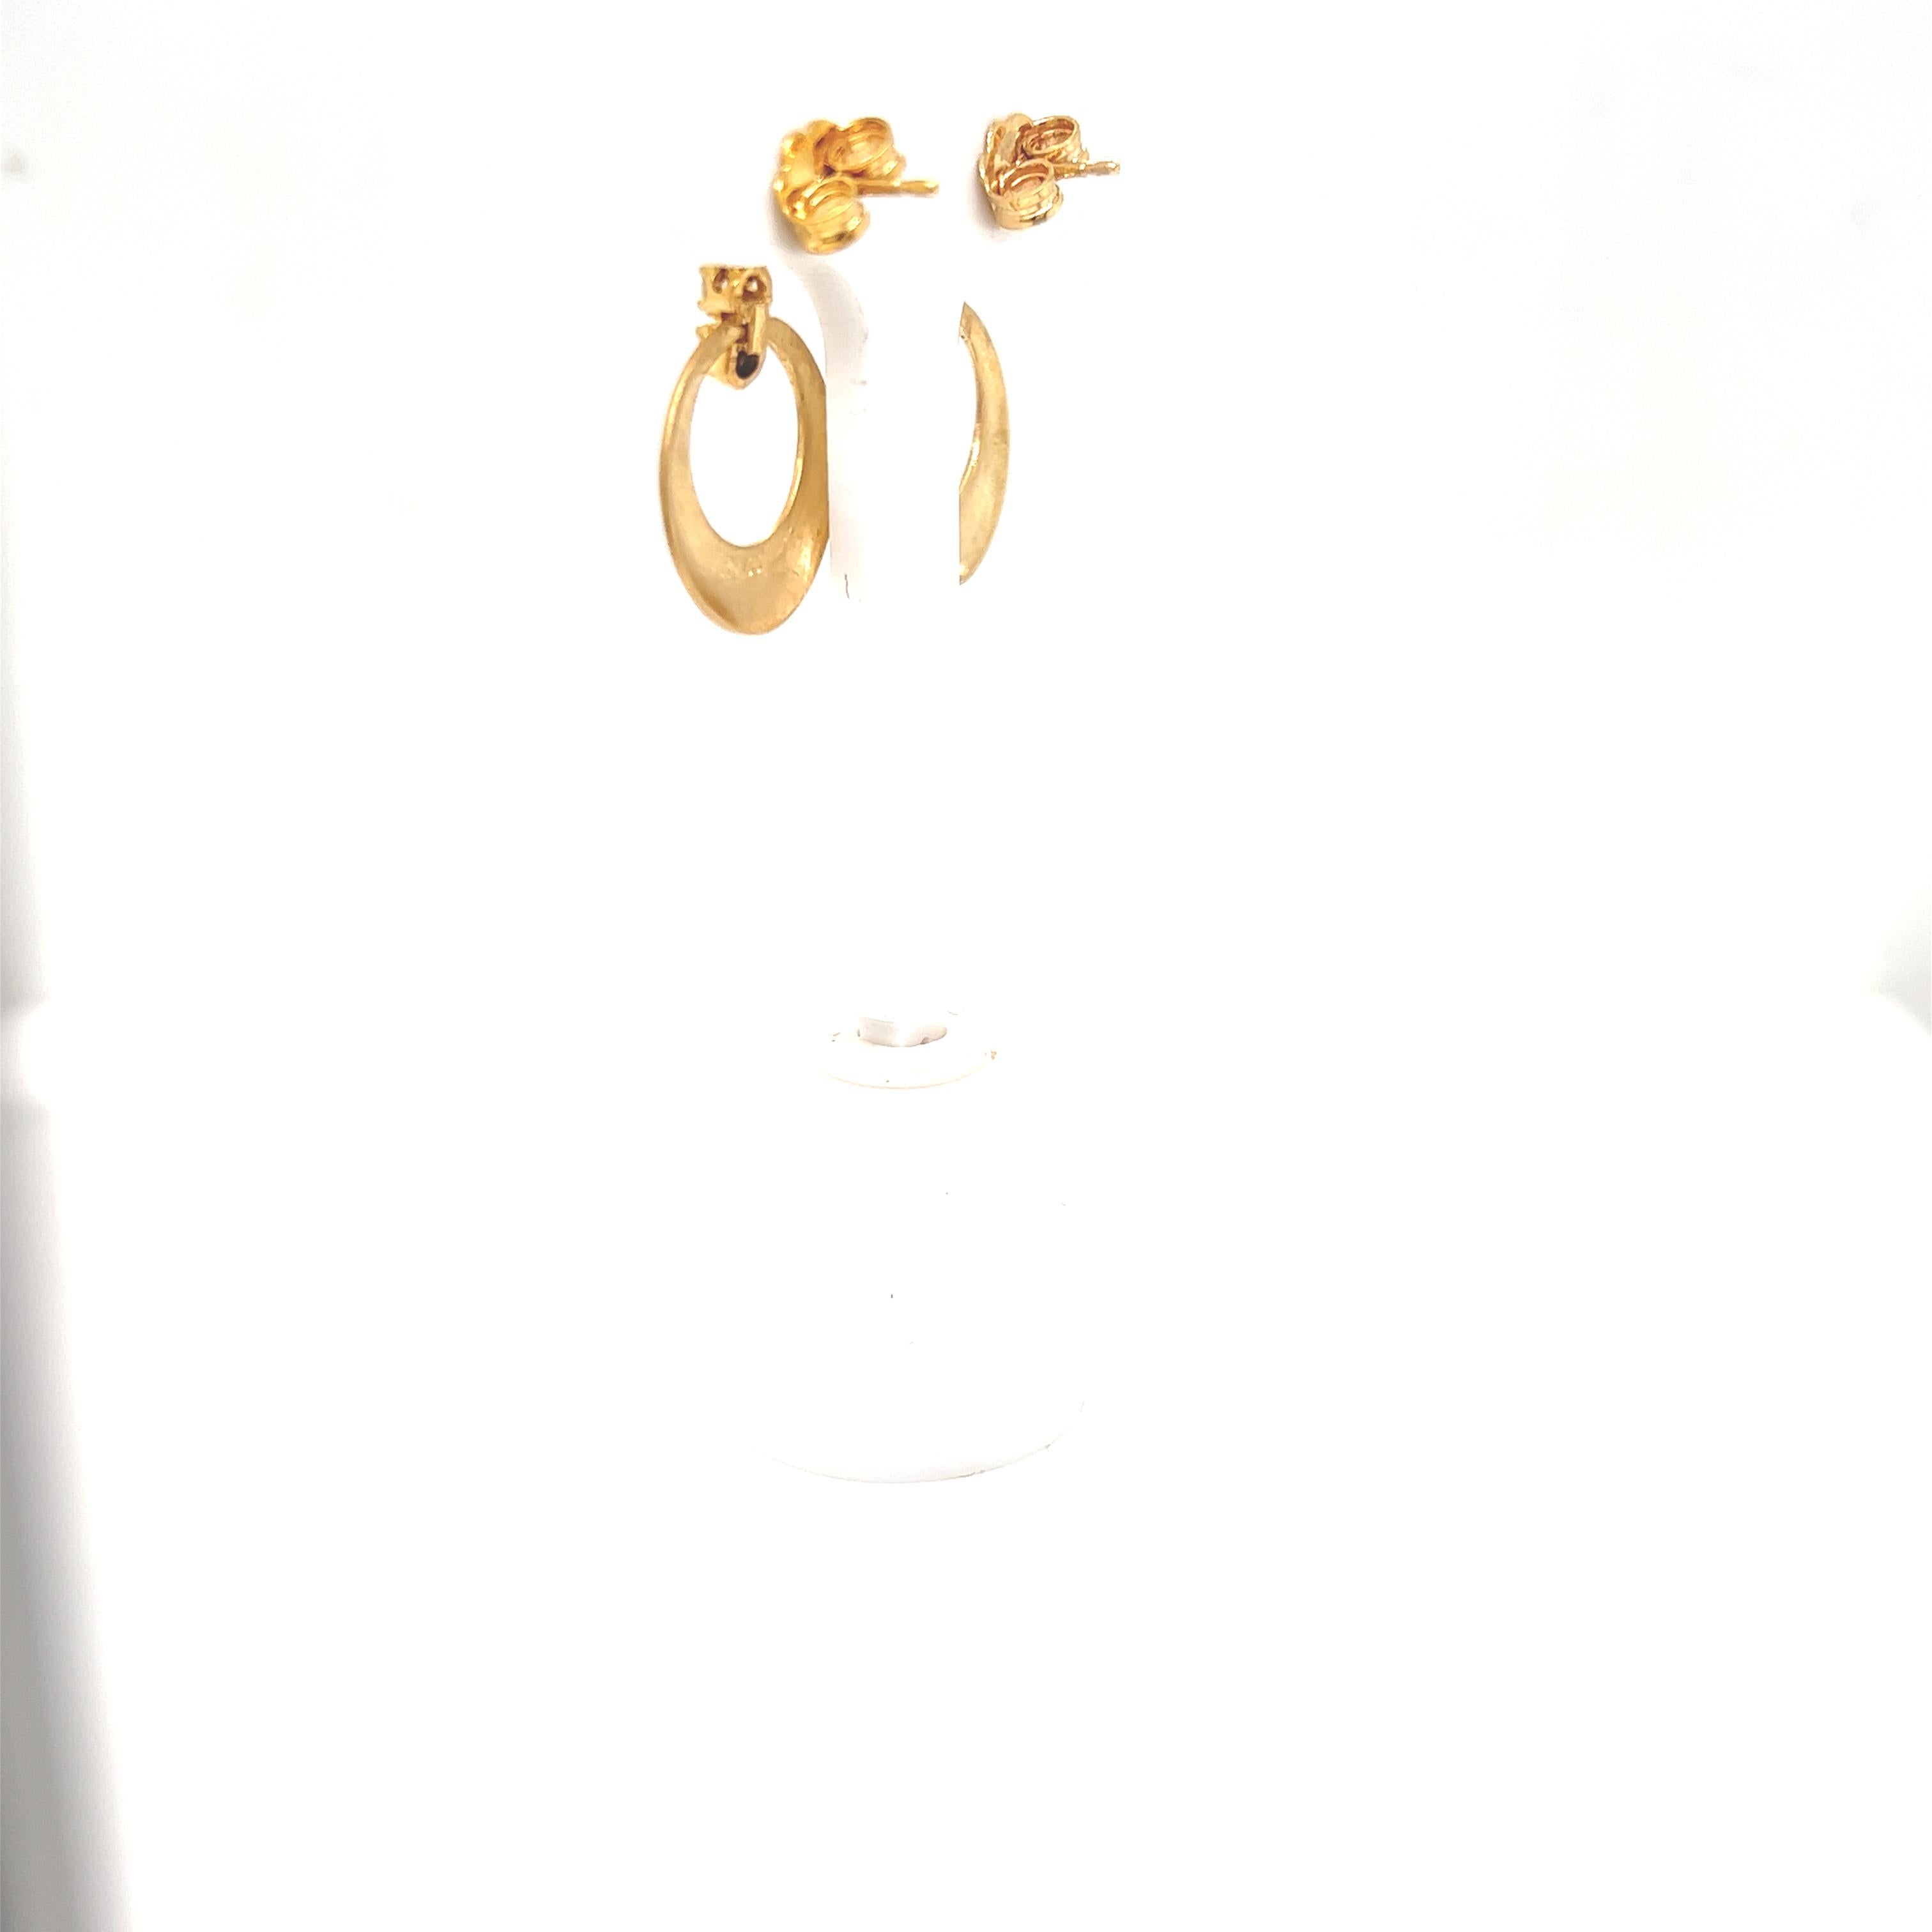 Round Cut Hand-Crafted 14 Karat Yellow Gold Dangling Open Circle Earrings For Sale